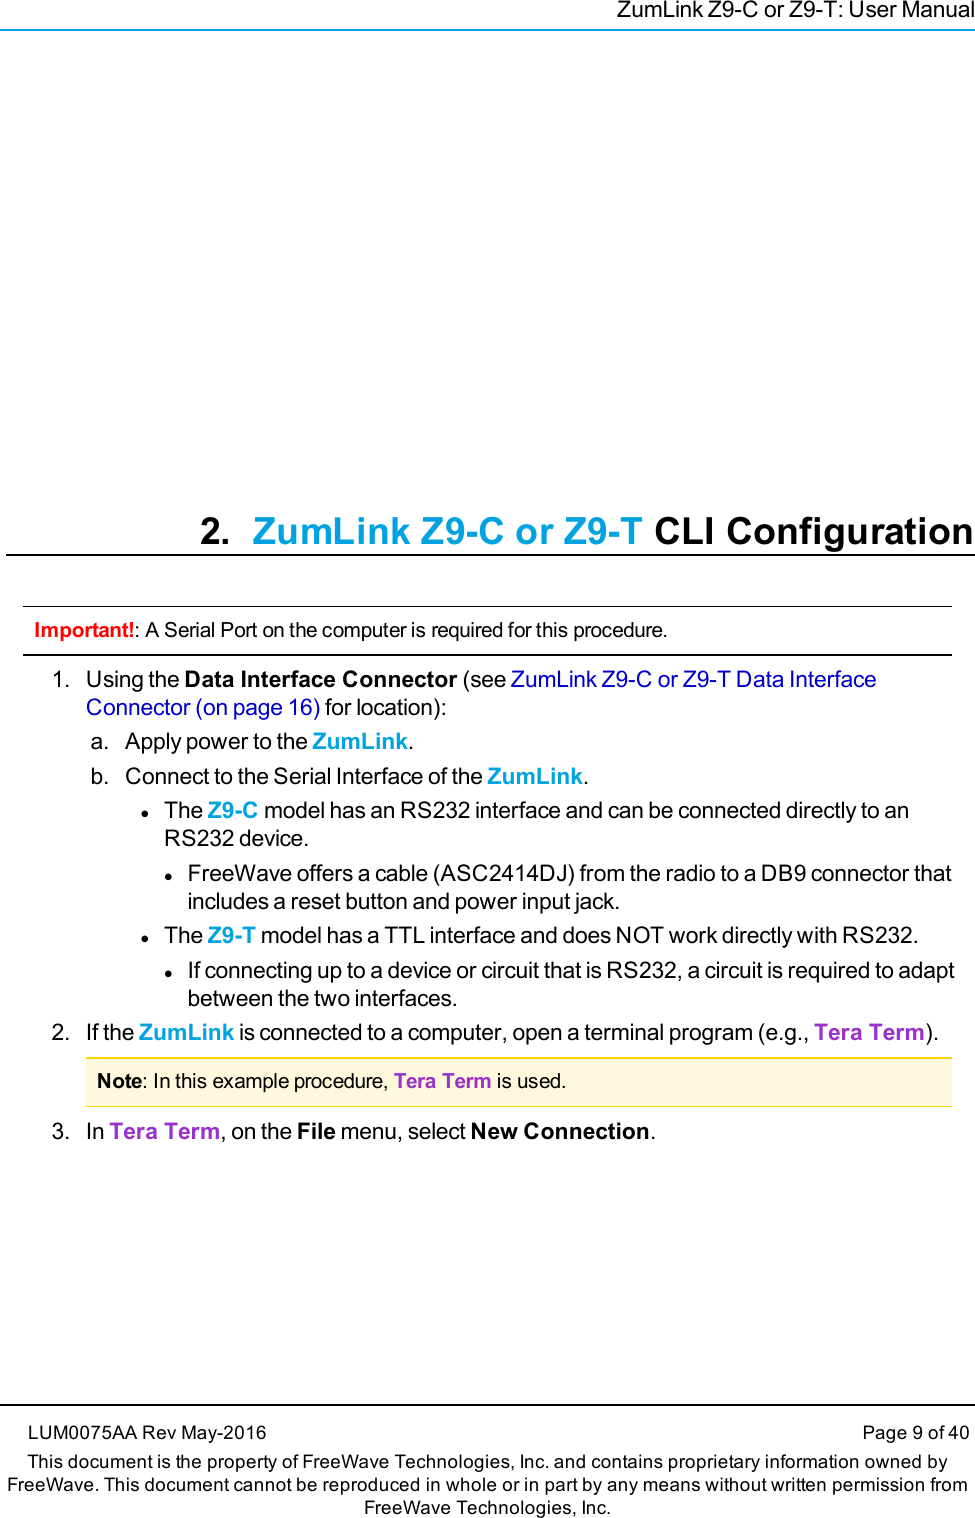 ZumLink Z9-C or Z9-T: User Manual2. ZumLink Z9-C or Z9-T CLI ConfigurationImportant!: A Serial Port on the computer is required for this procedure.1. Using the Data Interface Connector (see ZumLink Z9-C or Z9-T Data InterfaceConnector (on page 16) for location):a. Apply power to the ZumLink.b. Connect to the Serial Interface of the ZumLink.lThe Z9-C model has an RS232 interface and can be connected directly to anRS232 device.lFreeWave offers a cable (ASC2414DJ) from the radio to a DB9 connector thatincludes a reset button and power input jack.lThe Z9-T model has a TTL interface and does NOT work directly with RS232.lIf connecting up to a device or circuit that is RS232, a circuit is required to adaptbetween the two interfaces.2. If the ZumLink is connected to a computer, open a terminal program (e.g., Tera Term).Note: In this example procedure, Tera Term is used.3. In Tera Term, on the File menu, select New Connection.LUM0075AA Rev May-2016 Page 9 of 40This document is the property of FreeWave Technologies, Inc. and contains proprietary information owned byFreeWave. This document cannot be reproduced in whole or in part by any means without written permission fromFreeWave Technologies, Inc.